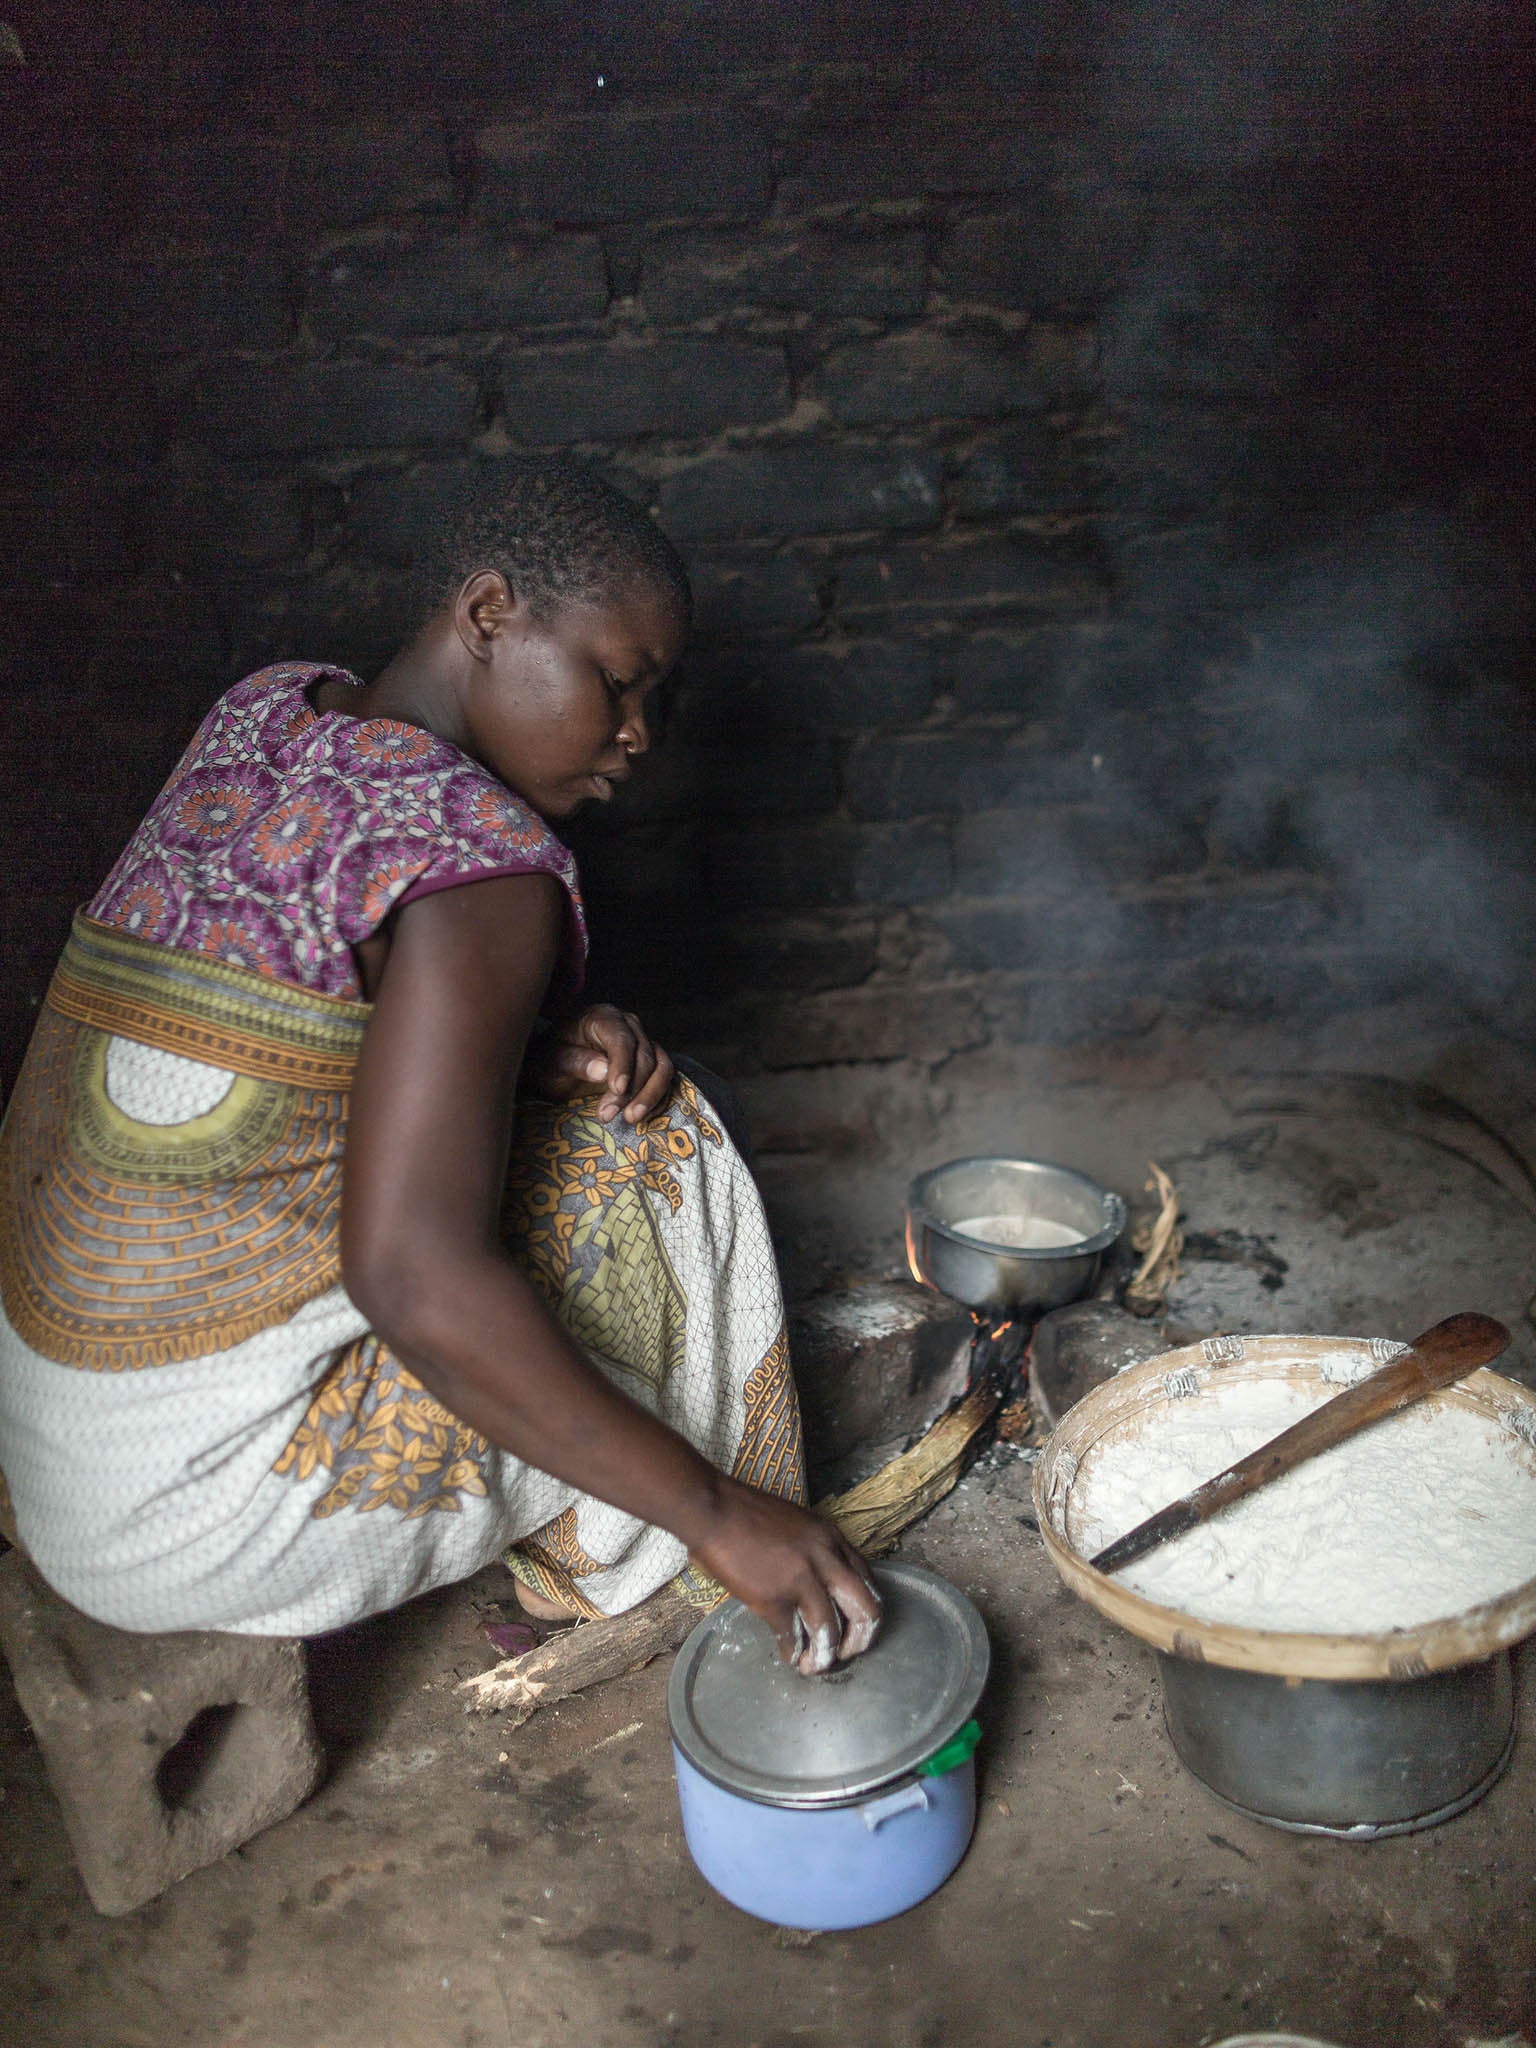 Cooking Nzima: m local staple of ground corn similar to polentaaize mash is a Malawian staple and served with every meal